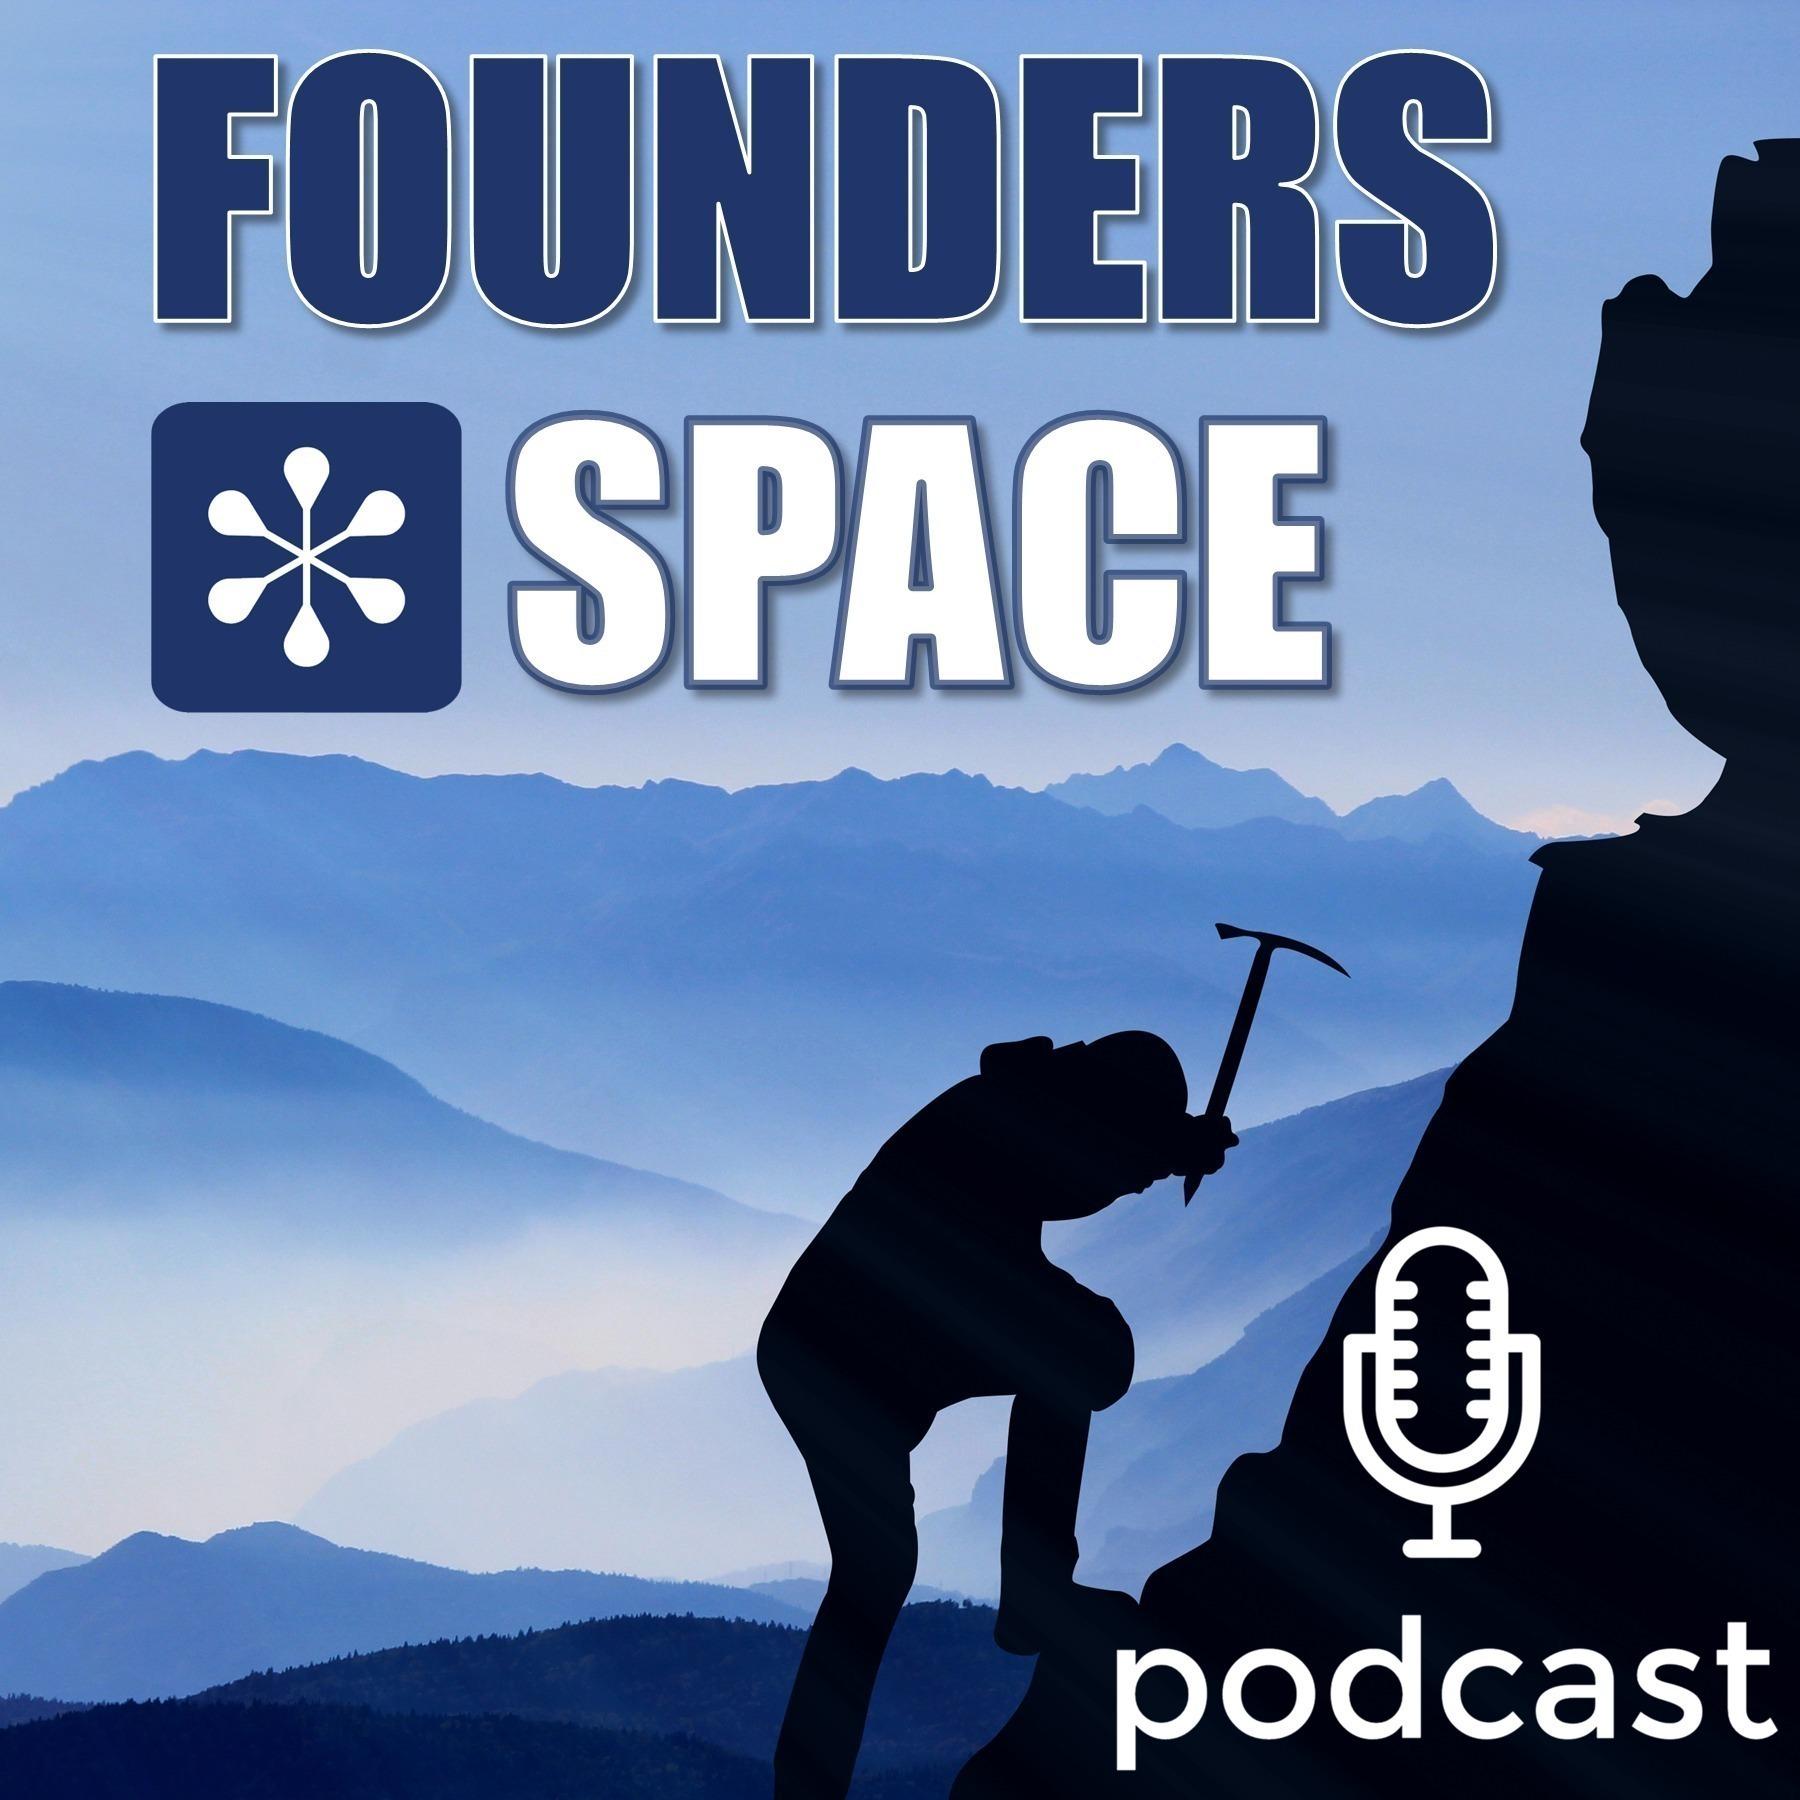 Founders Space Podcast - AI, Technology, Startups, Investing and Business Innovation!